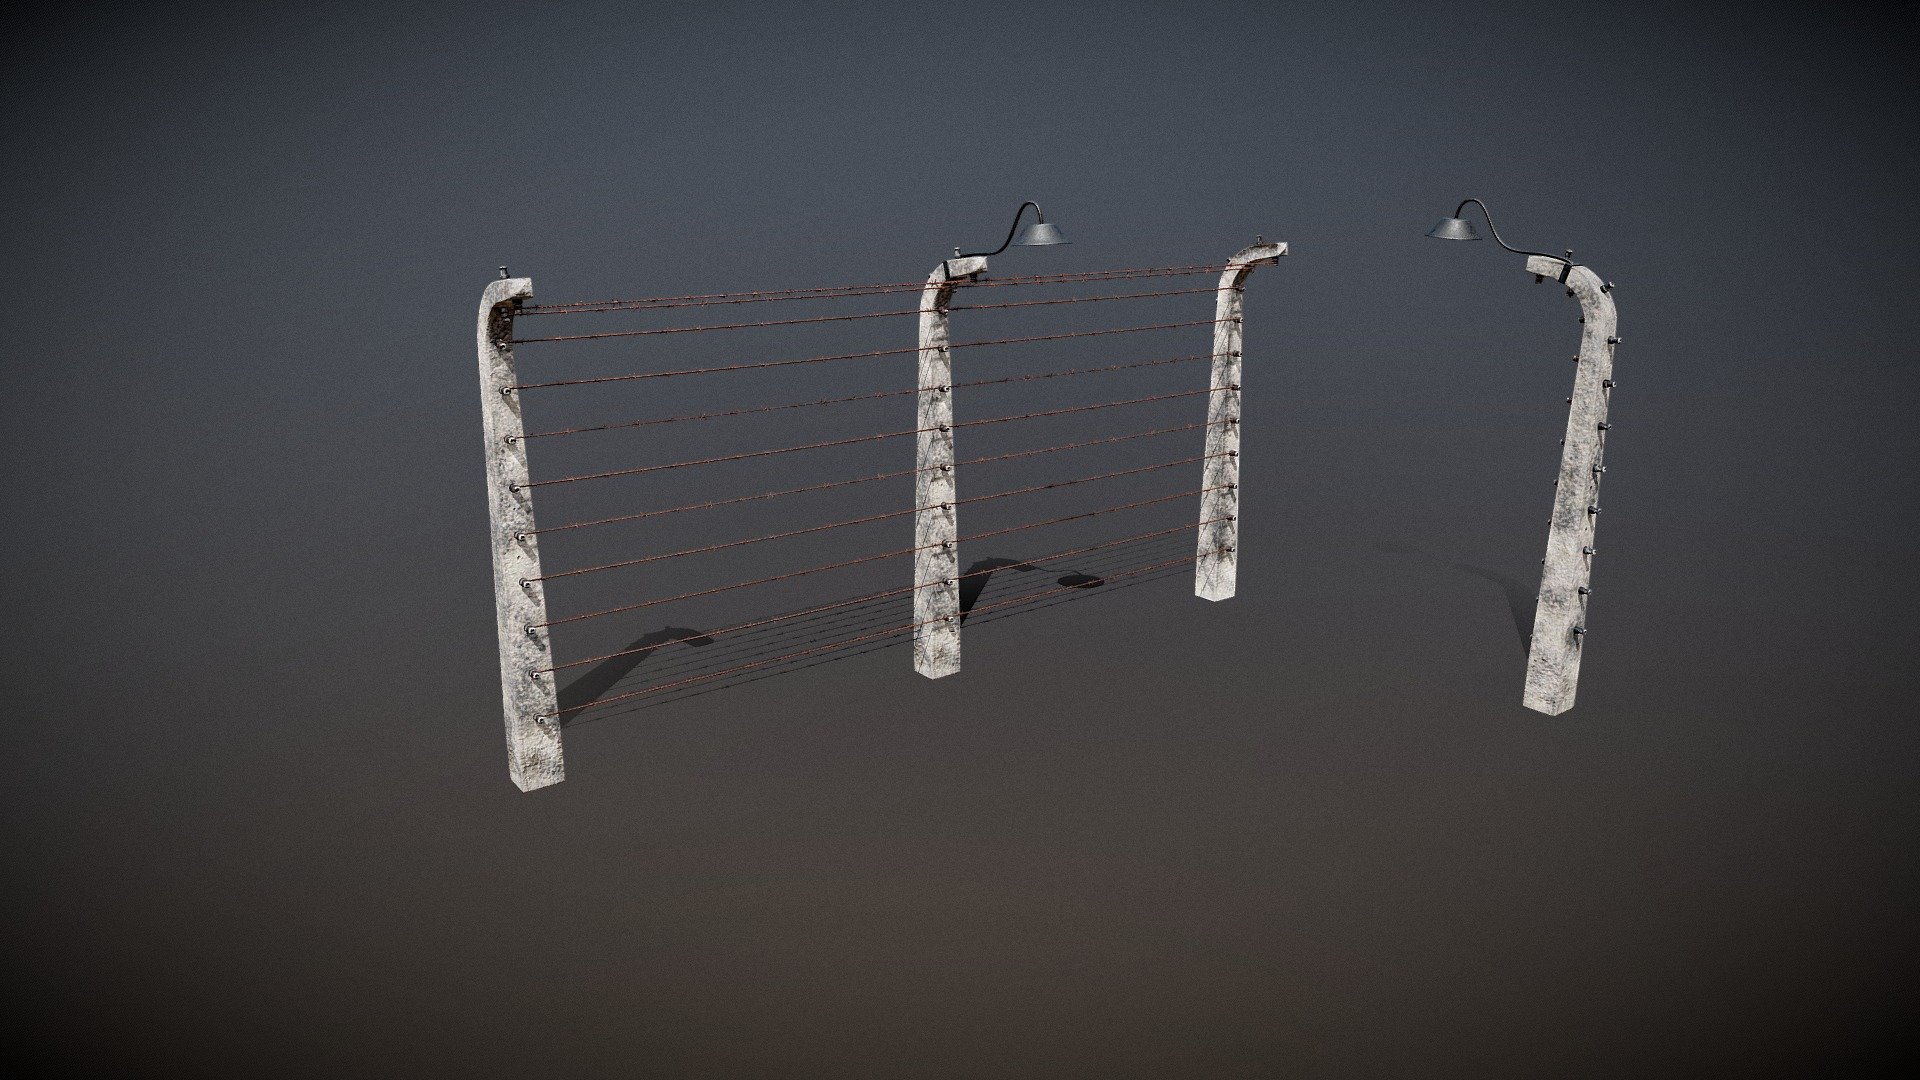 Modular electric fence from the Auschwitz Concentration Camp.
Model contains the following parts:




Module (17,078 Tris)

Module With Lamp (18,108 Tris)

End-Module (7,400 Tris)

End-Module With Lamp (8,428 Tris)

Four 2048x2048 textures are packed using the layout:




Albedo + Opacity

Occlusion + Roughness + Metallic

Normal (Y+ Up)

Emissive

Modeled in Blender 2.91 and textured using Substance Painter 2019 3d model